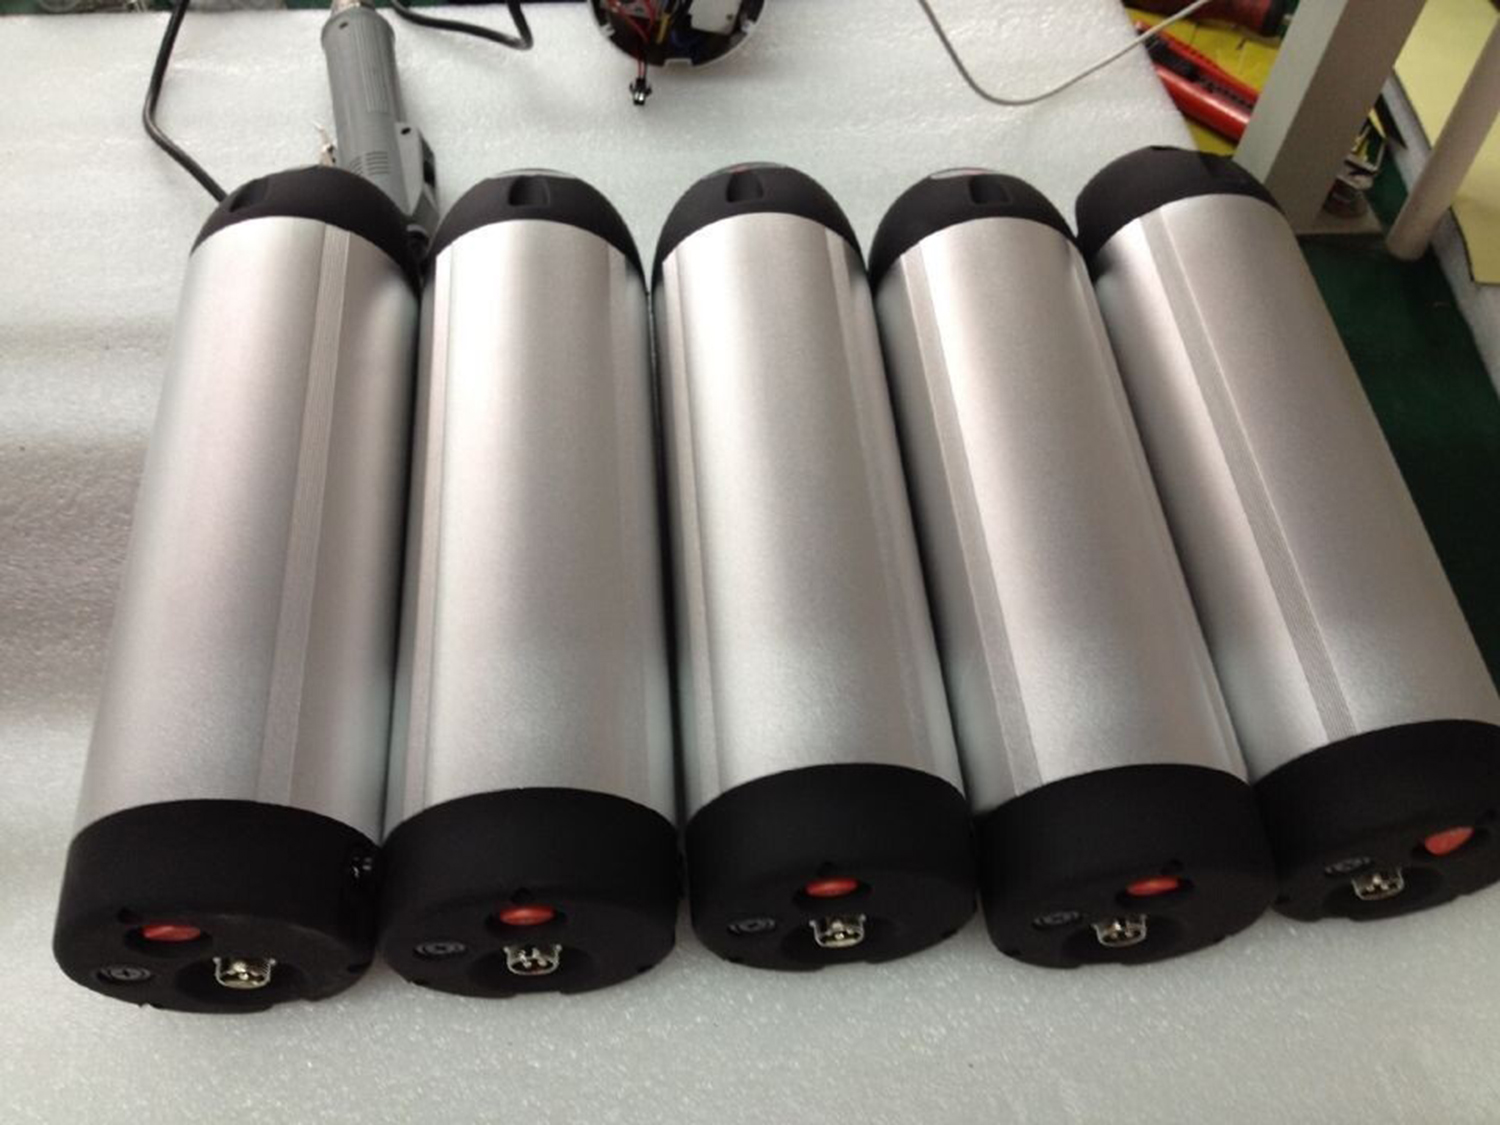 max power,max power battery,lithium battery,lifepo4 battery,lead acid battery,battery pack